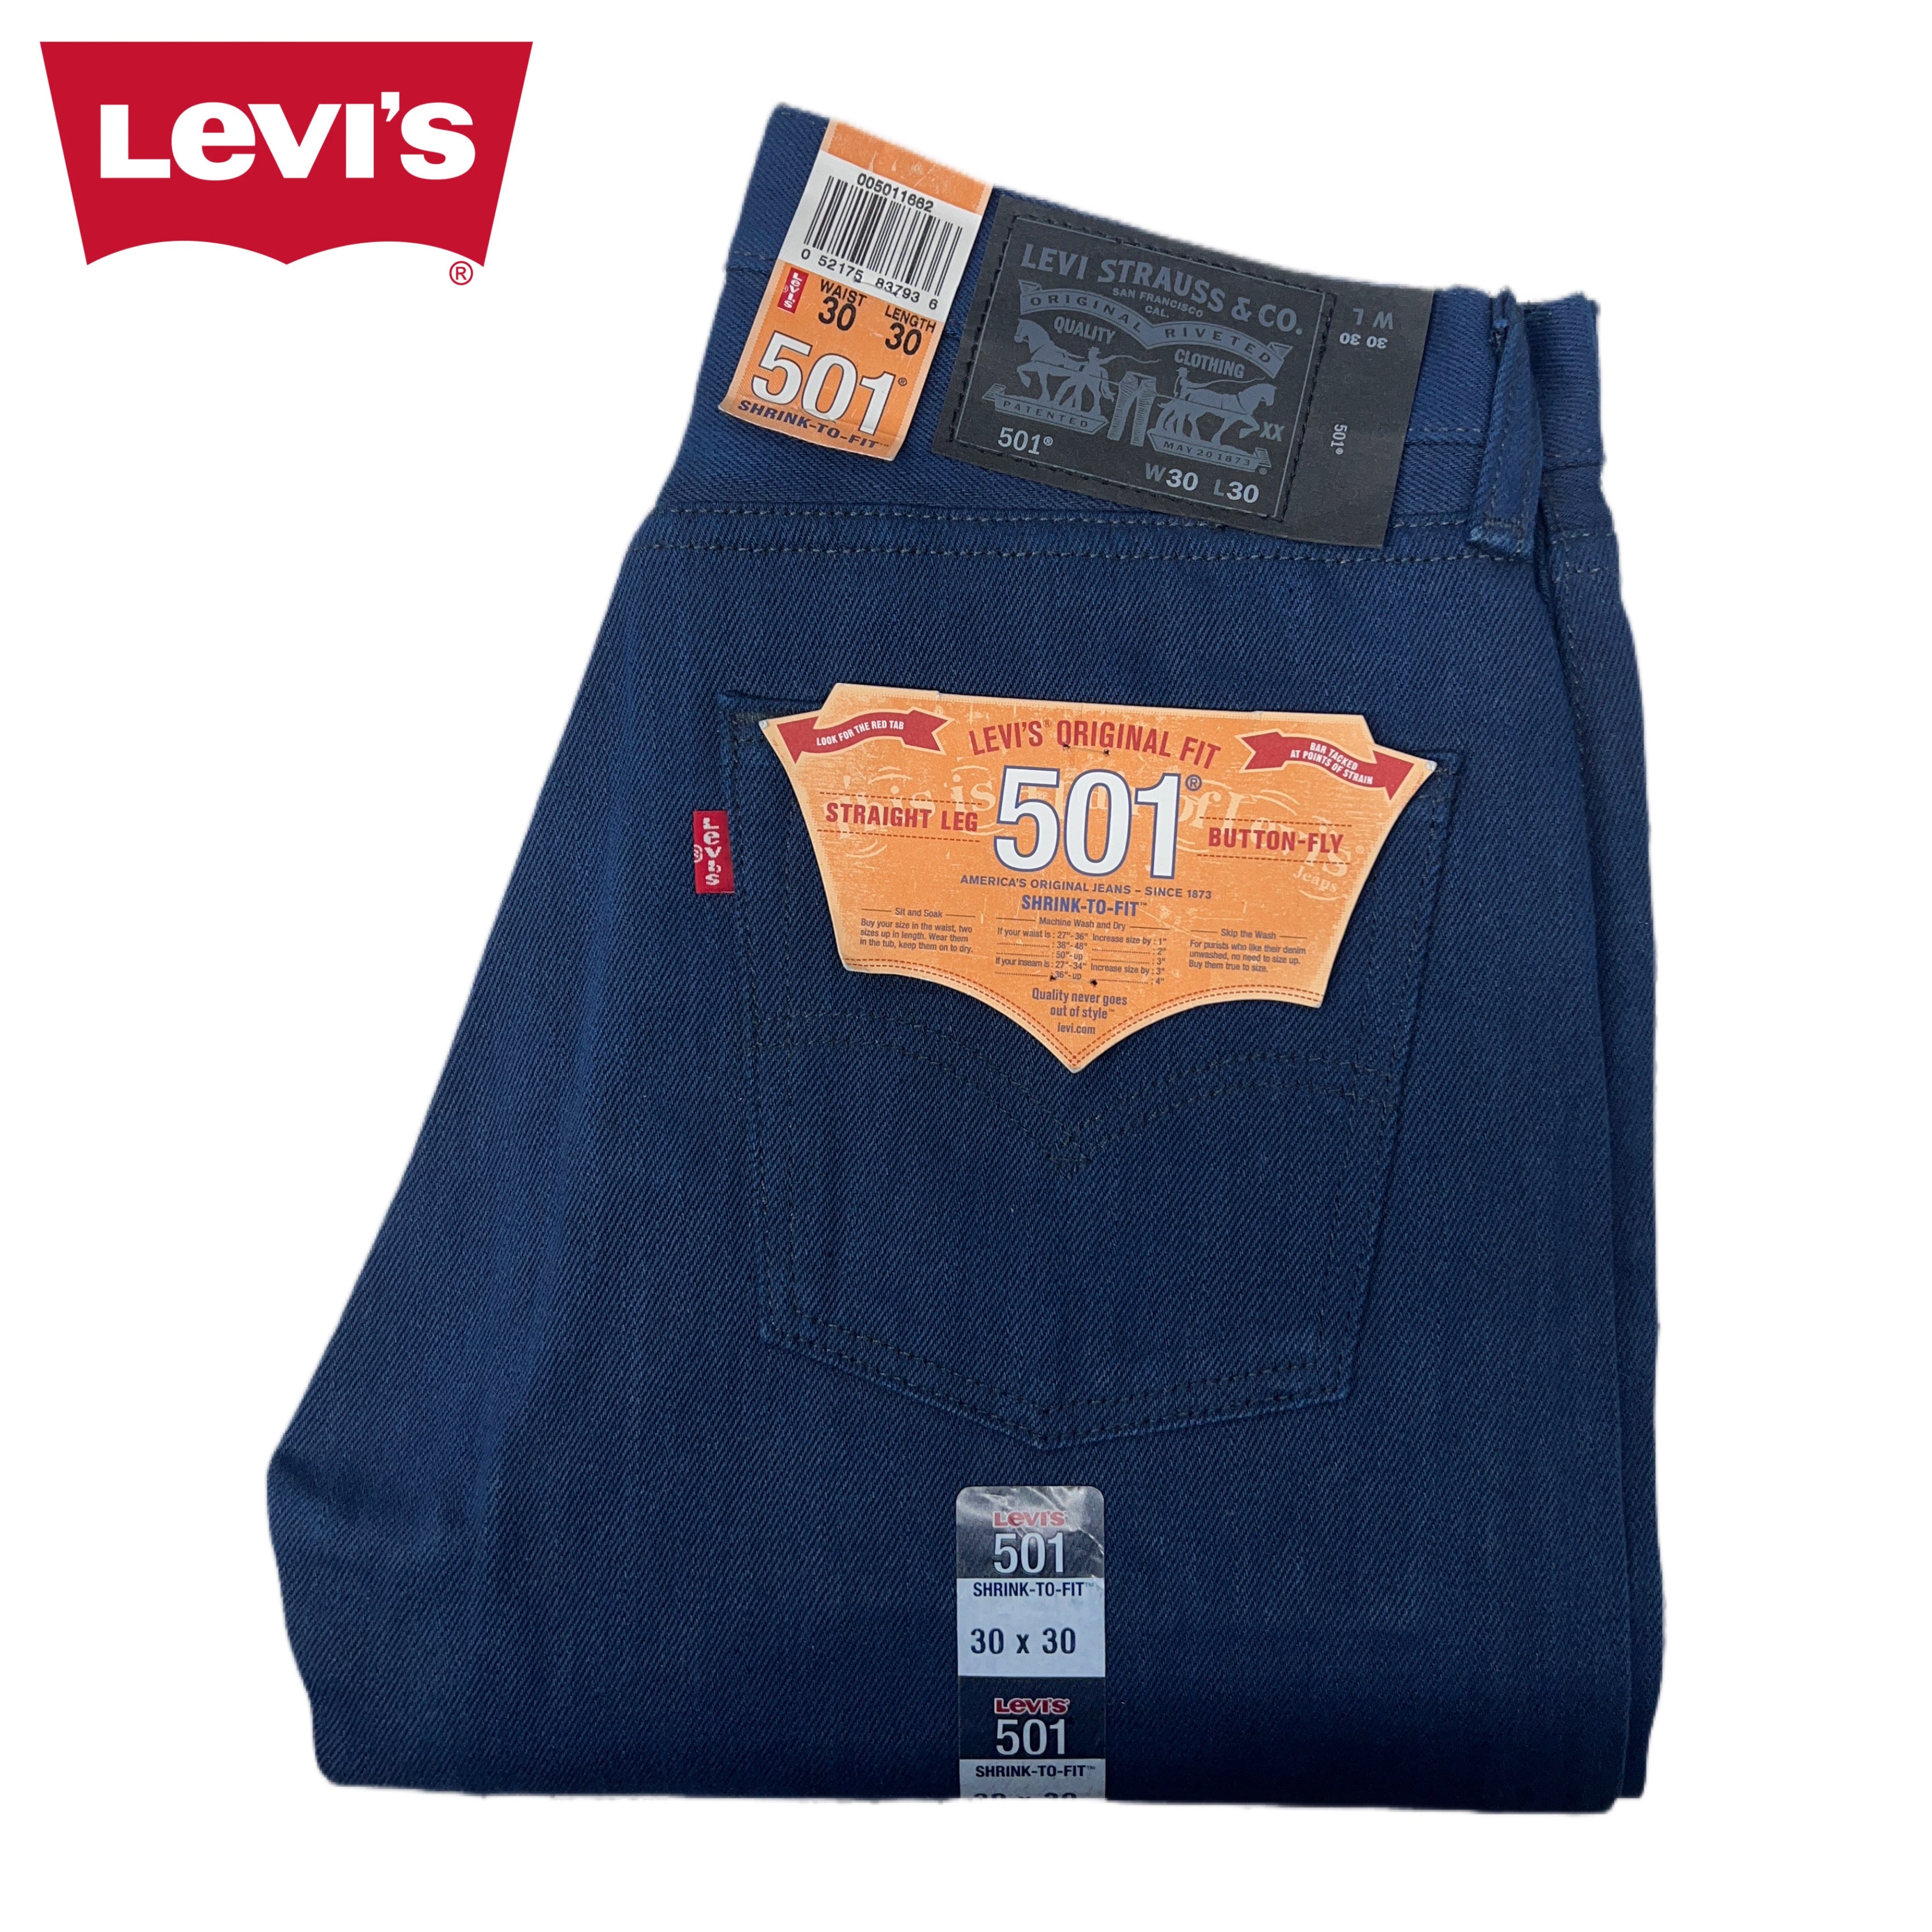 Levi's 501 Shrink-to-Fit - Navy